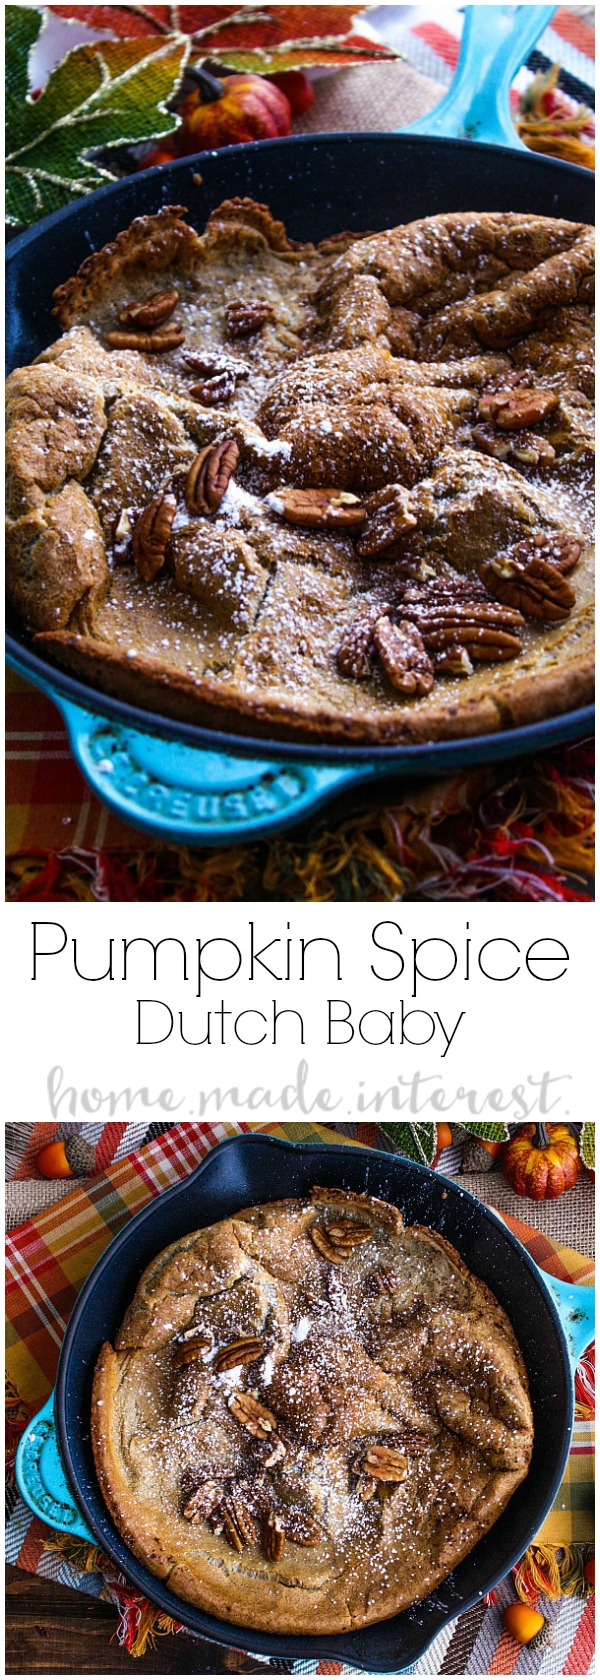 If you love fall recipes and pumpkin this Pumpkin Spice Dutch Baby is going to blow your mind. This easy dutch baby recipe is the perfect fall brunch or fall breakfast recipe with the warm, fragrant, delicious flavor of pumpkin spice! 